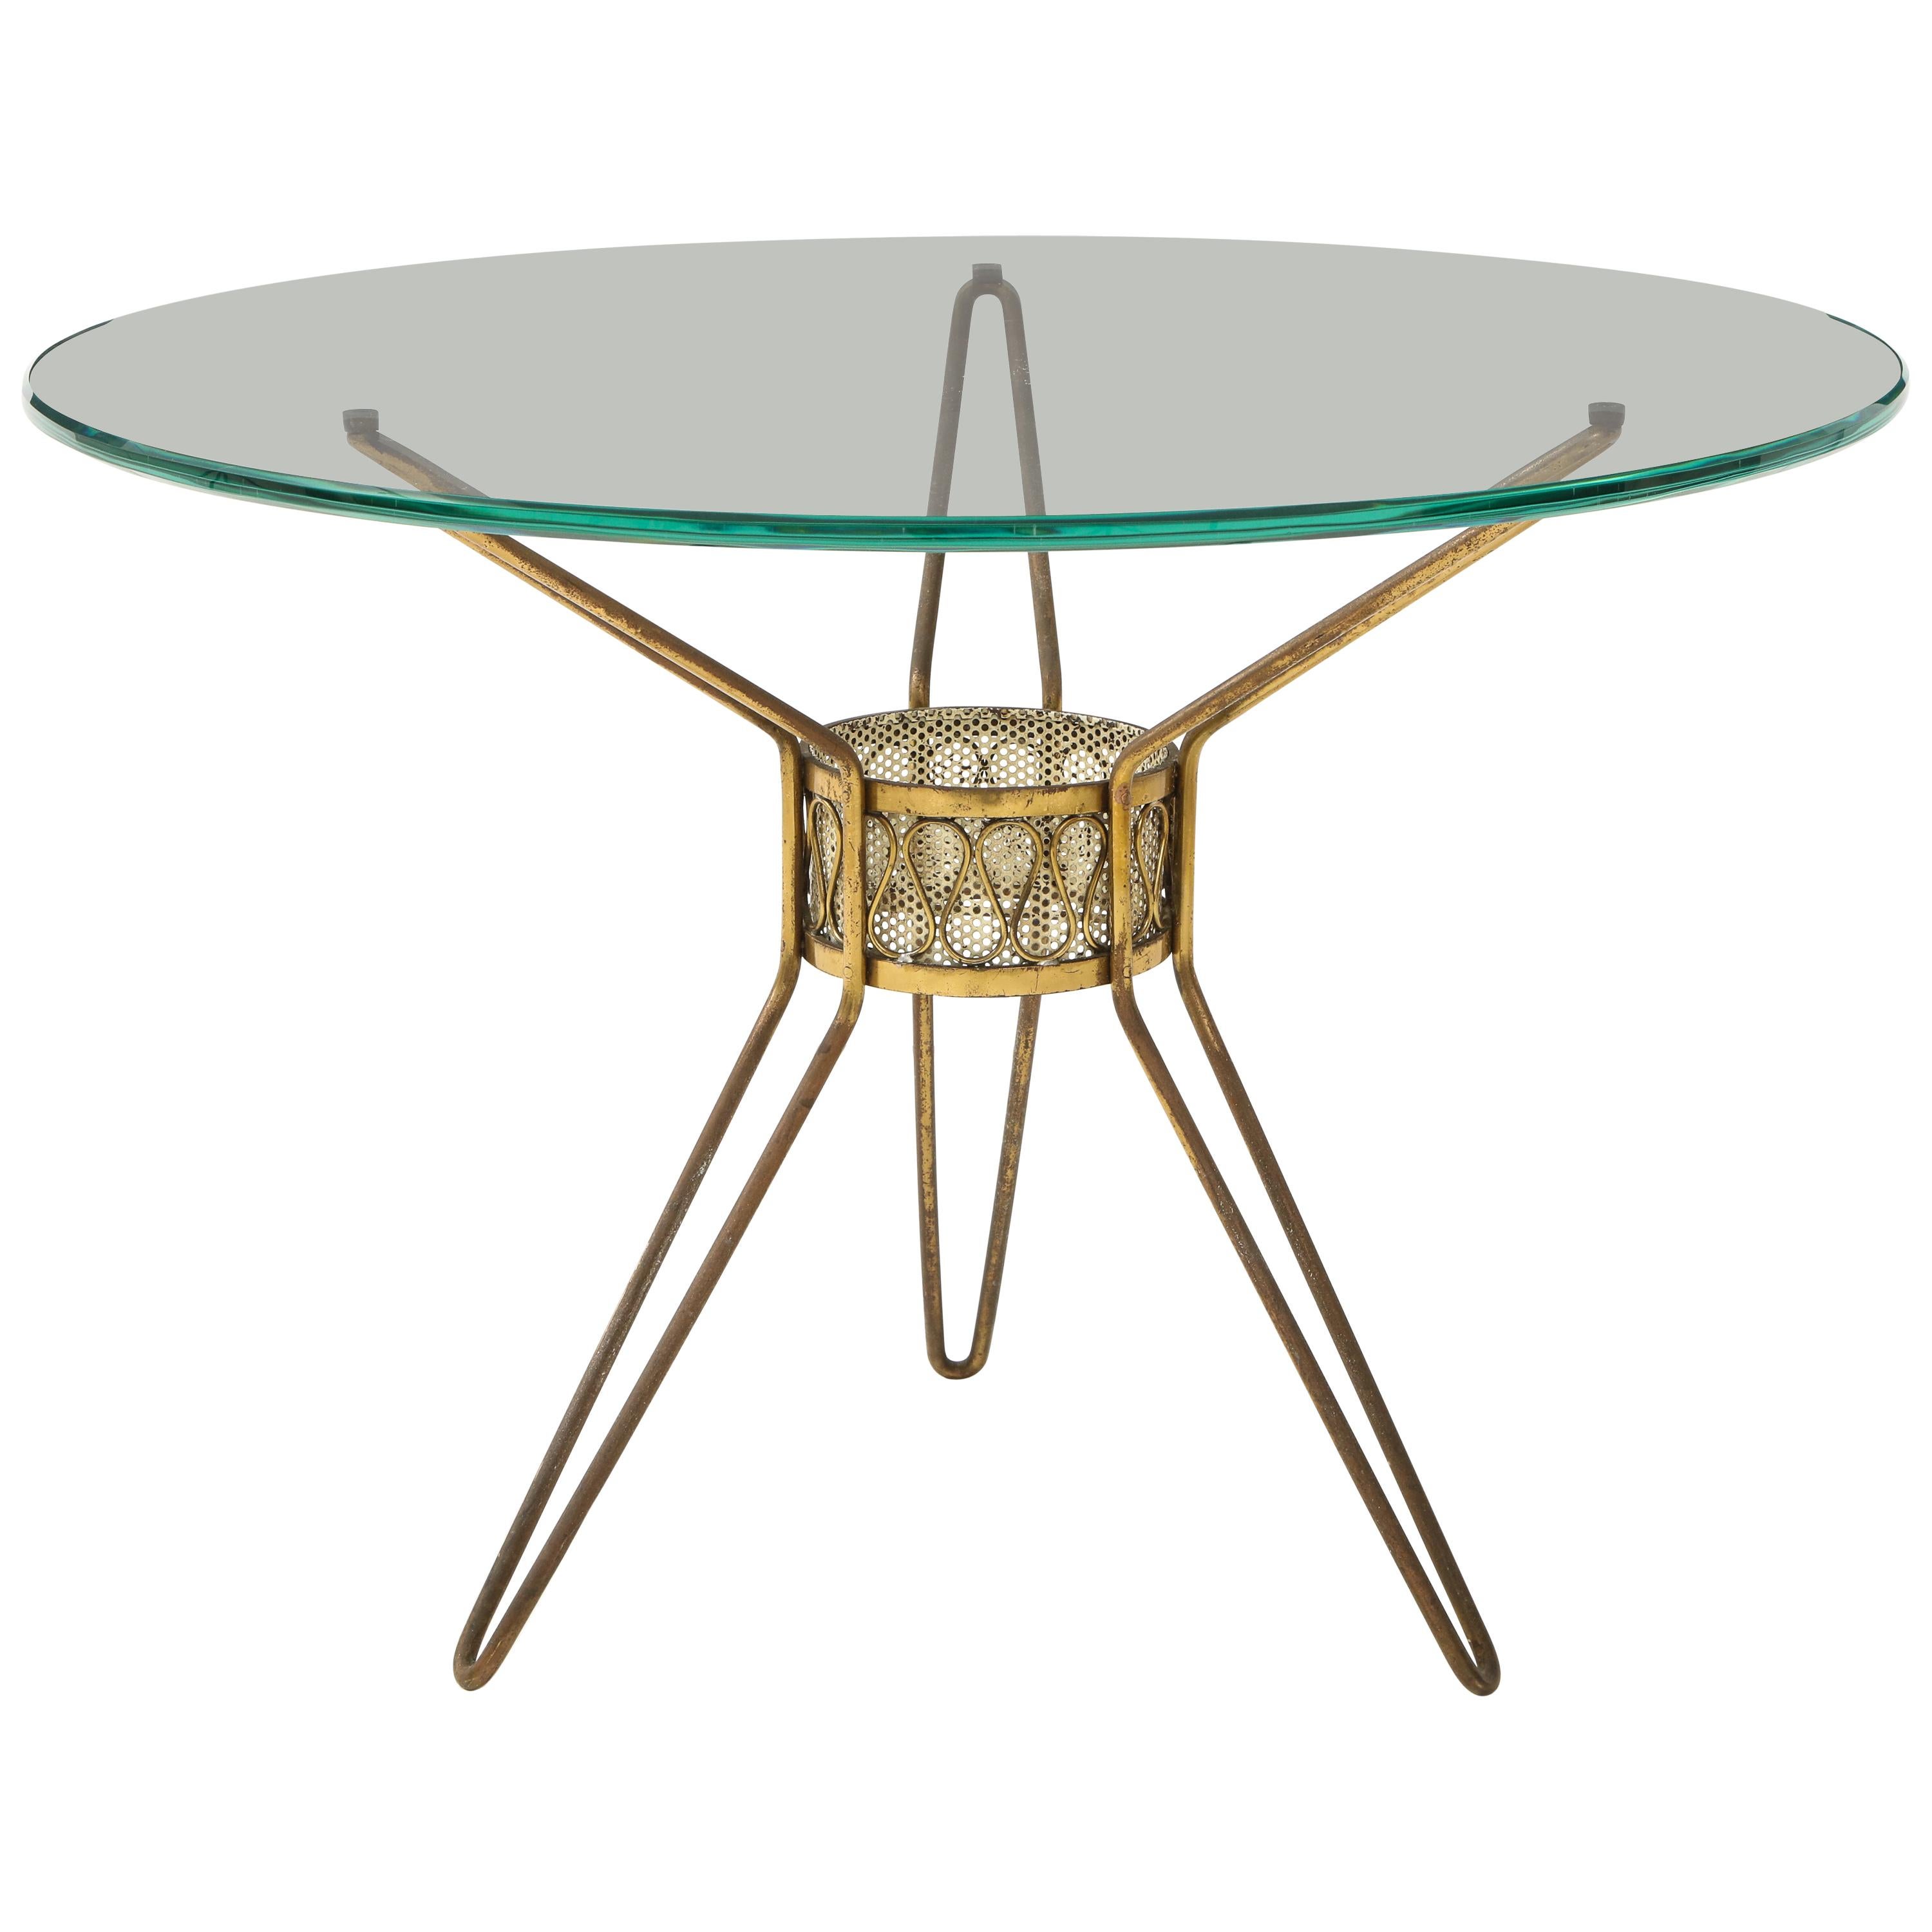 Gio Ponti Style Occasional Tripod Table, of the Period, Italy, circa 1950s